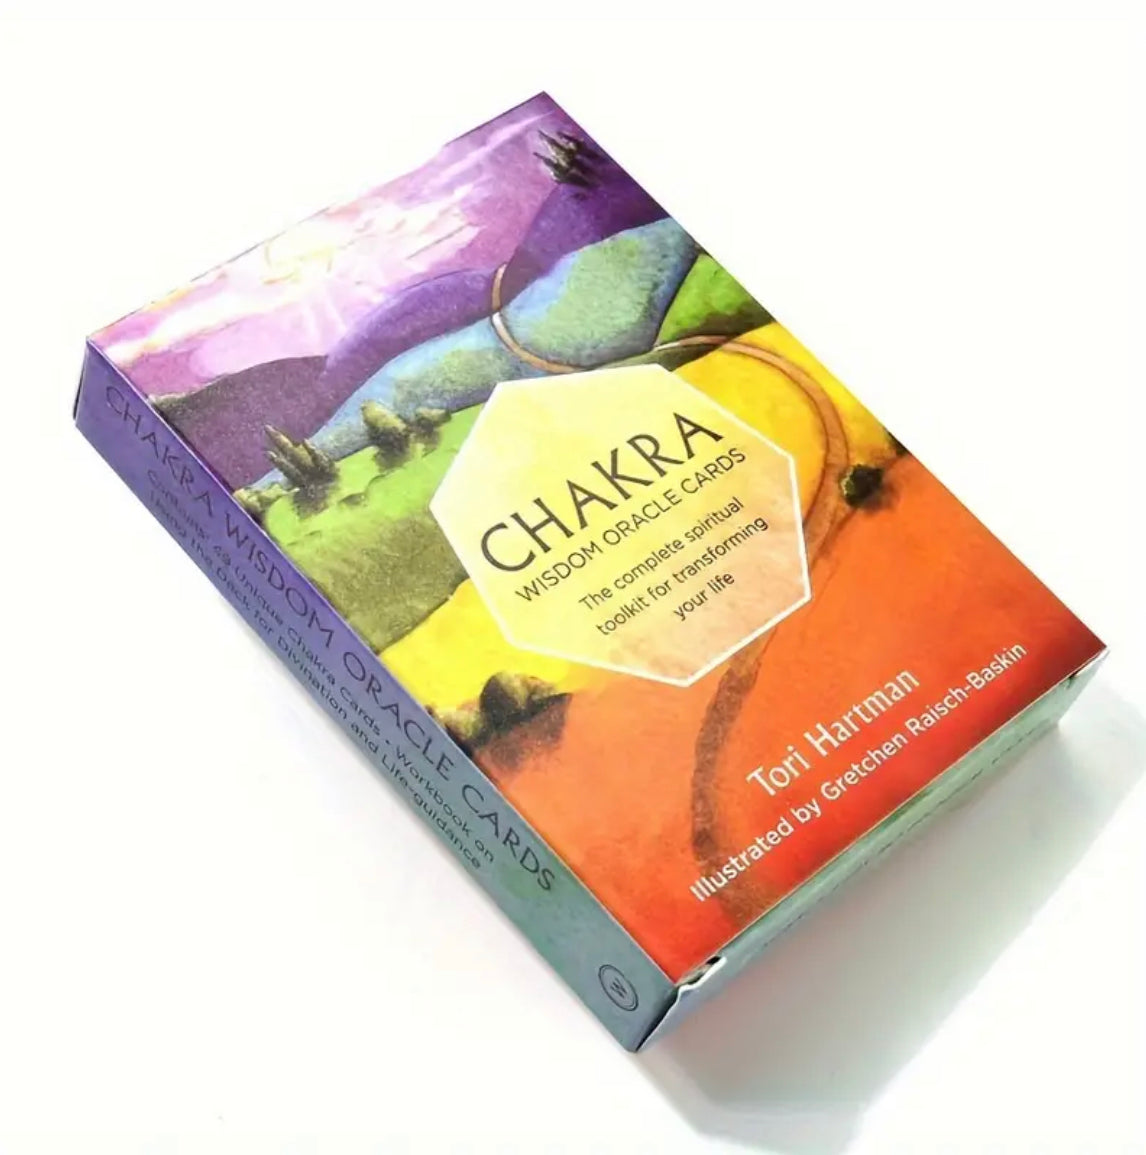 Chakra Wisdom | Oracle Cards | English | Divination Tools | Cartomancy | Witch Supplies